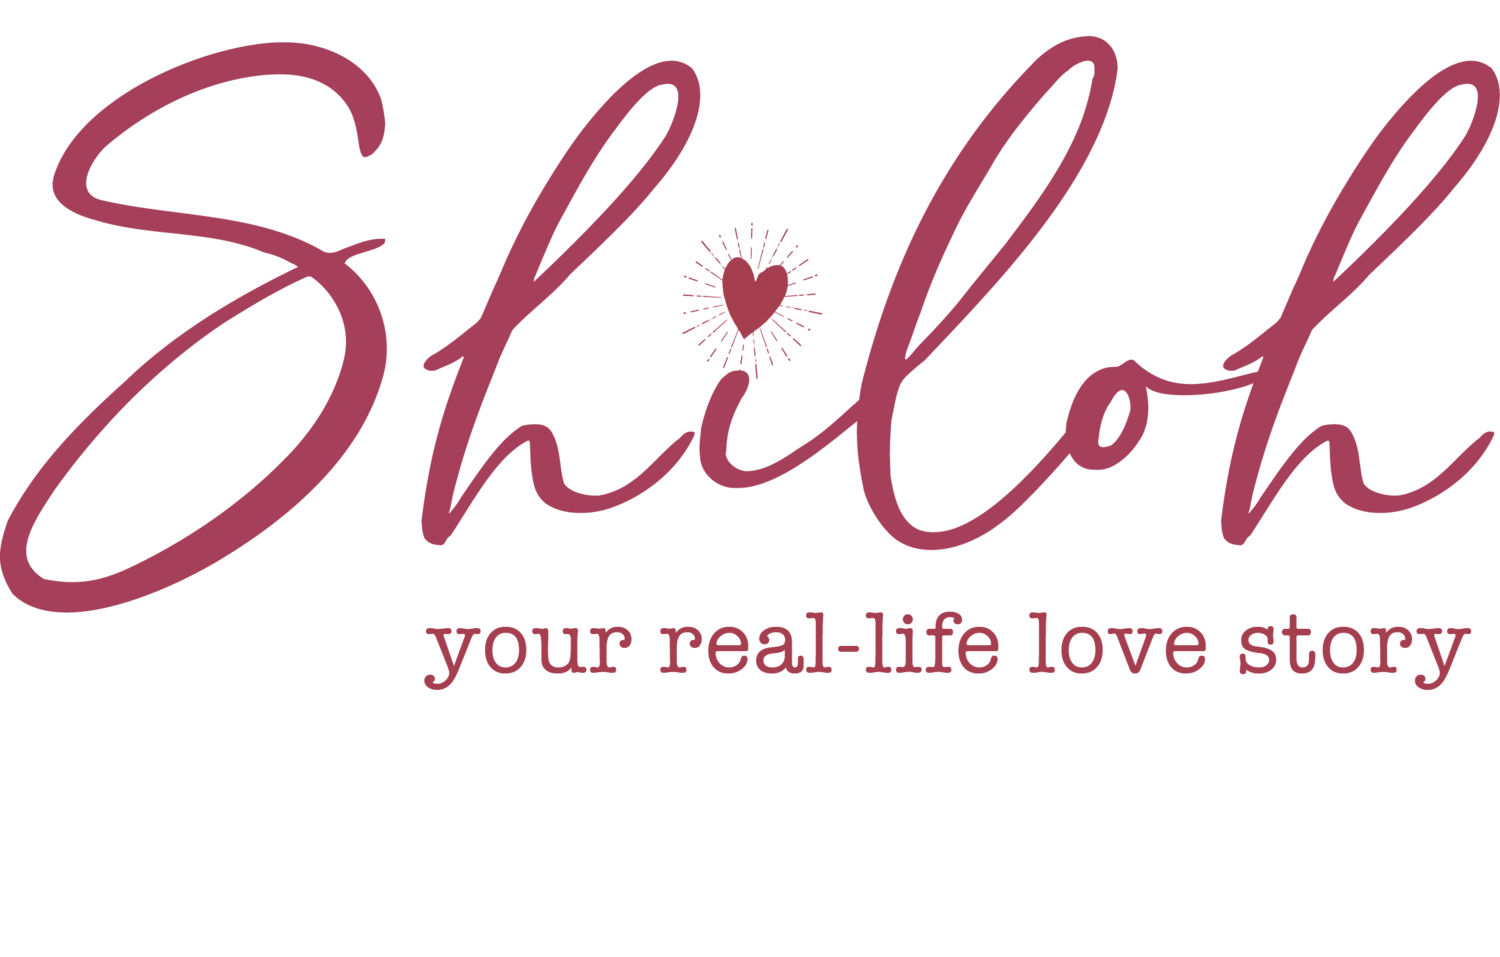 Shiloh Minor - Your Real-Life Love Story